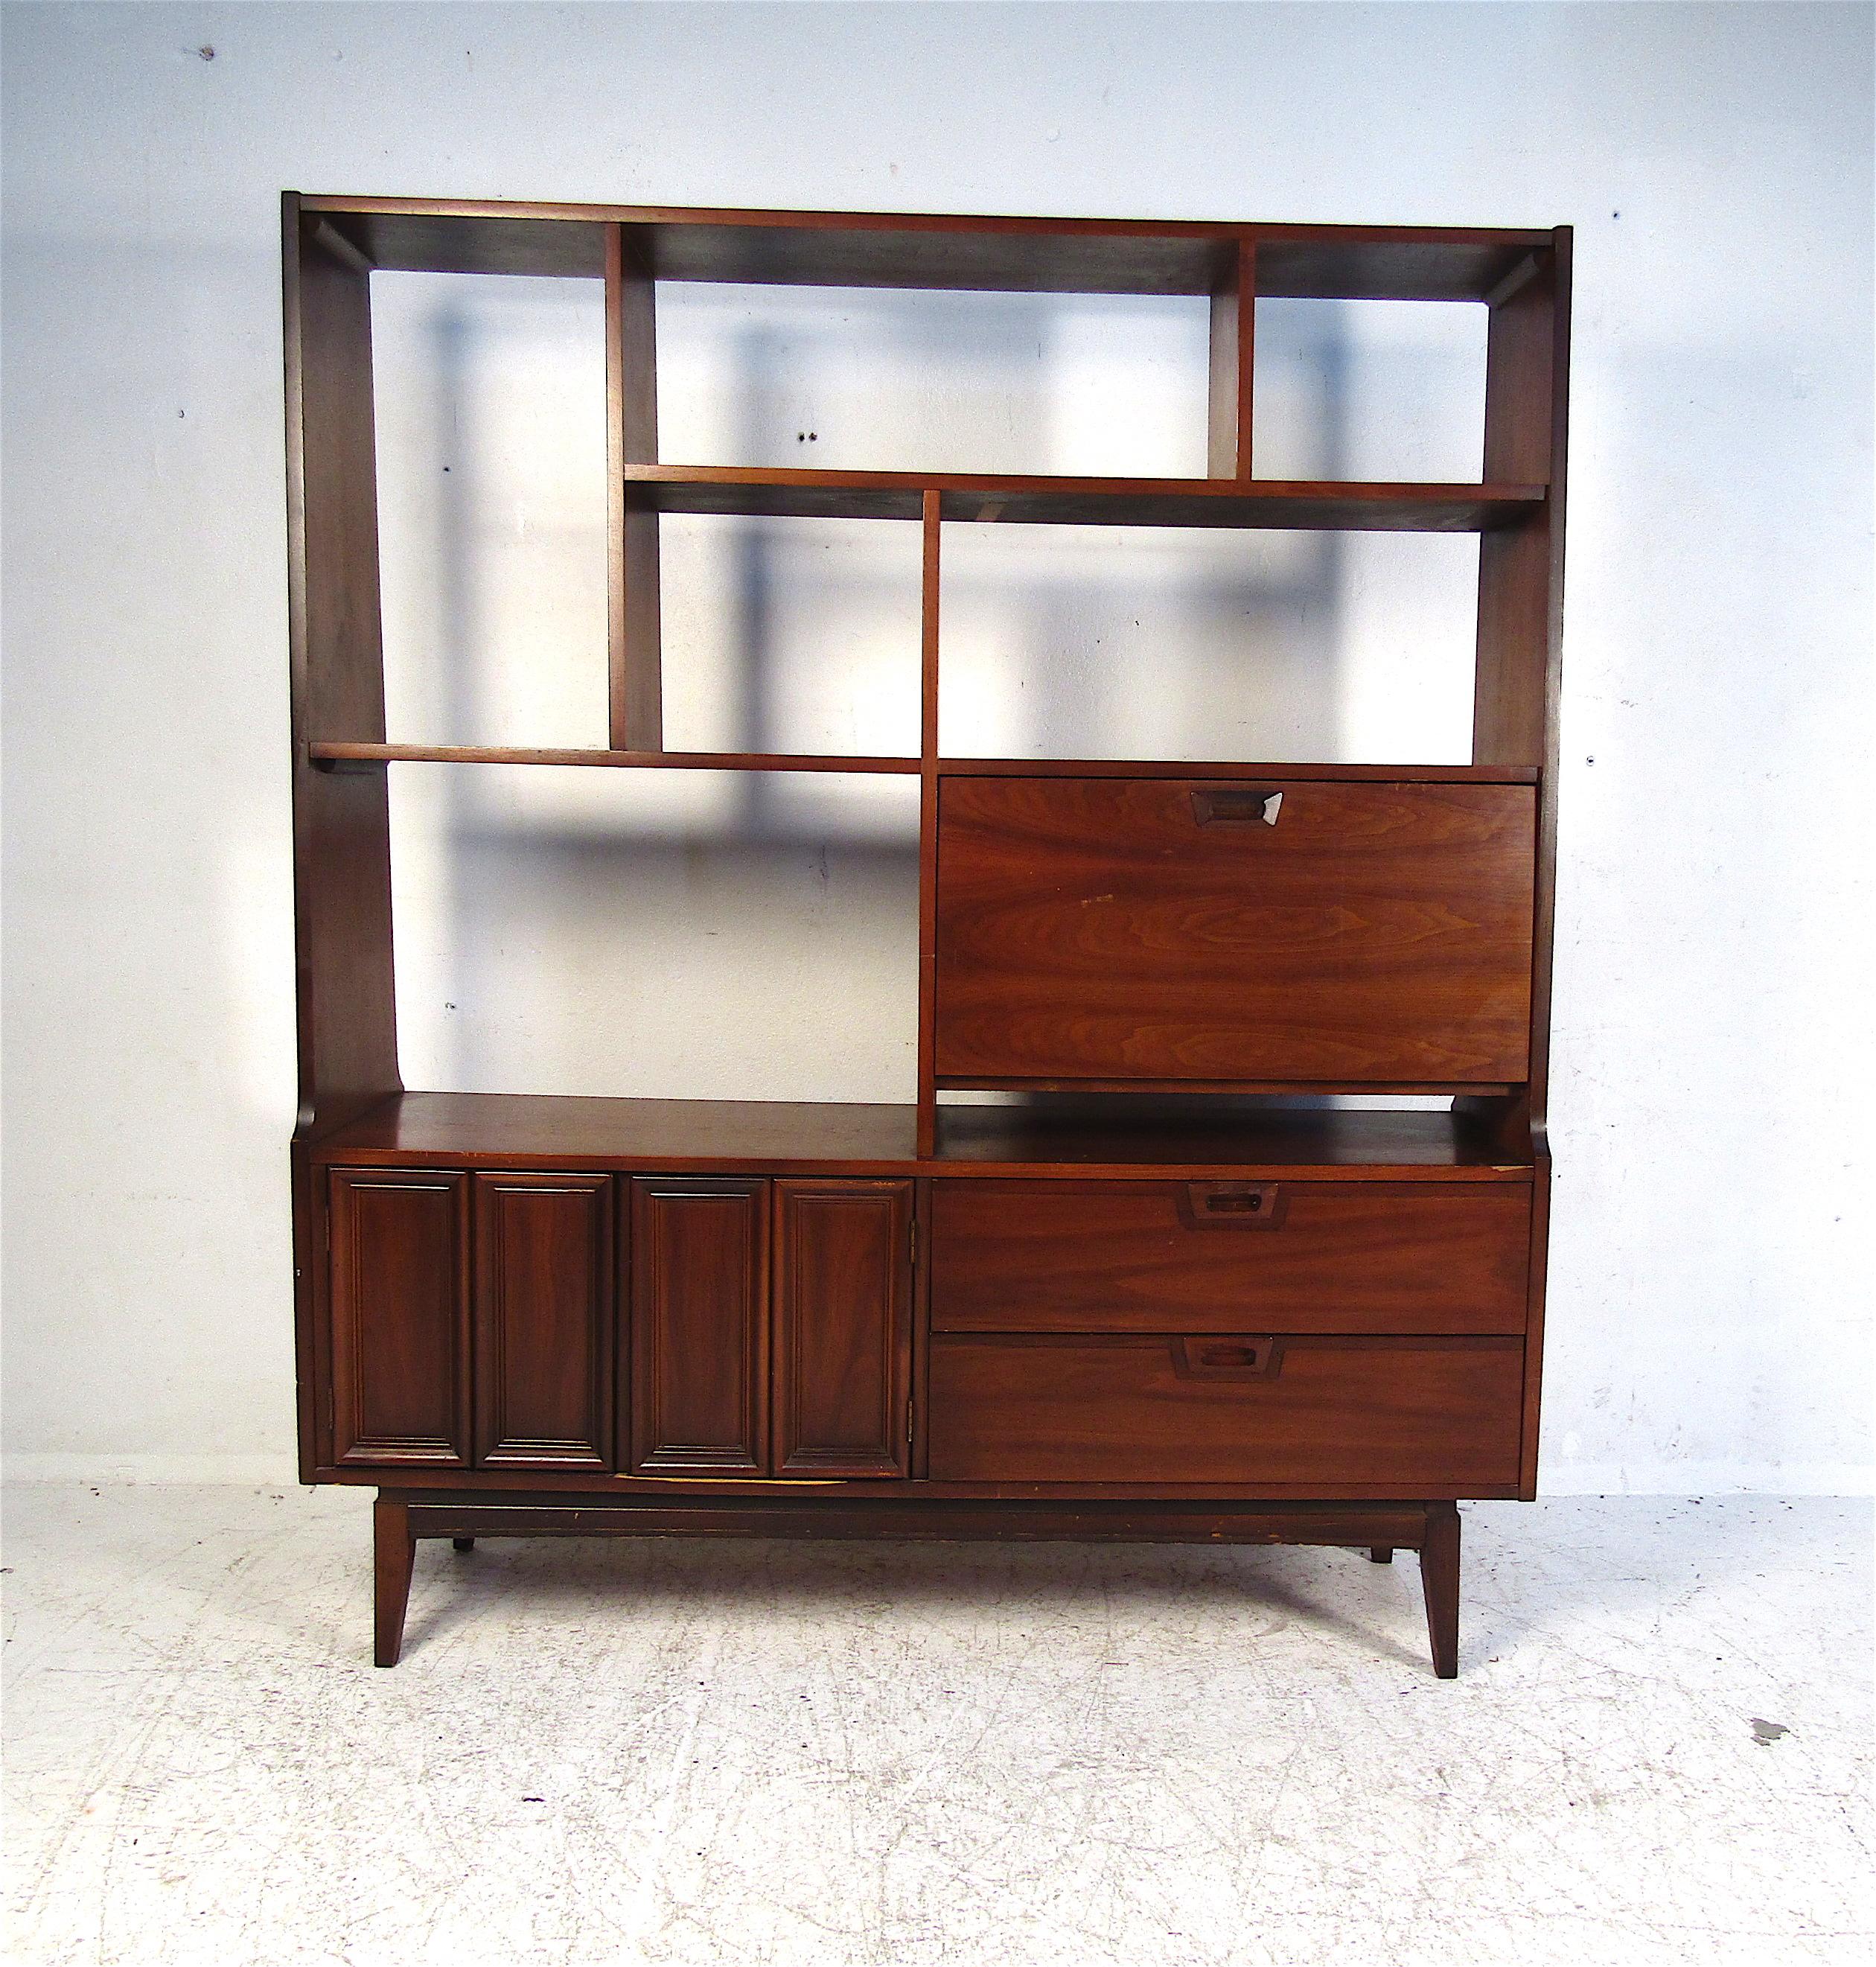 Stylish midcentury free-standing wall unit with shelving. Please confirm item location with dealer (NJ or NY).